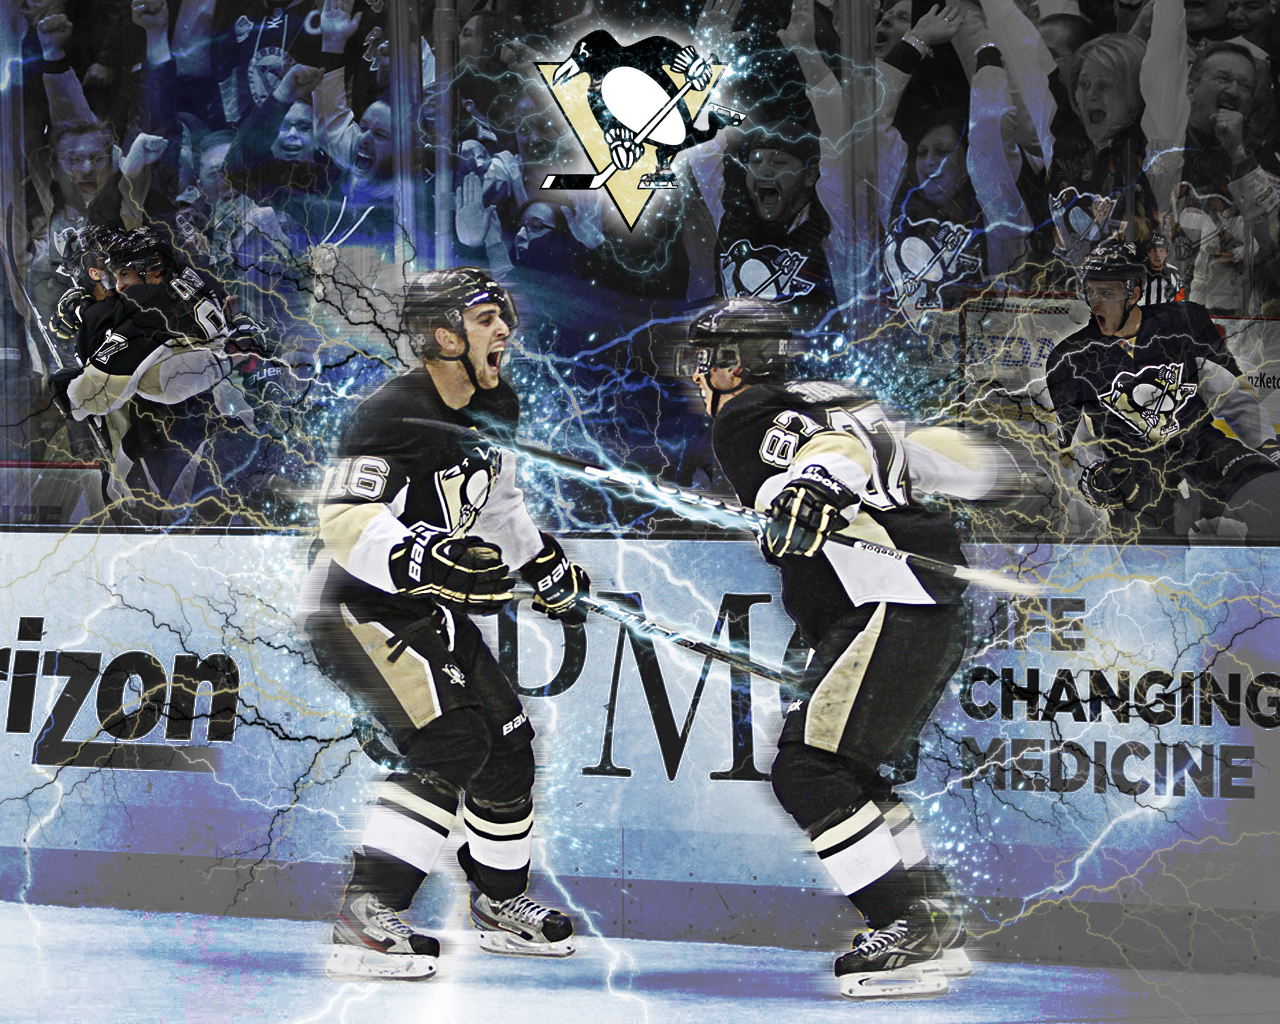 psf on wednesday march 13 2013 in pittsburgh penguins wallpapers